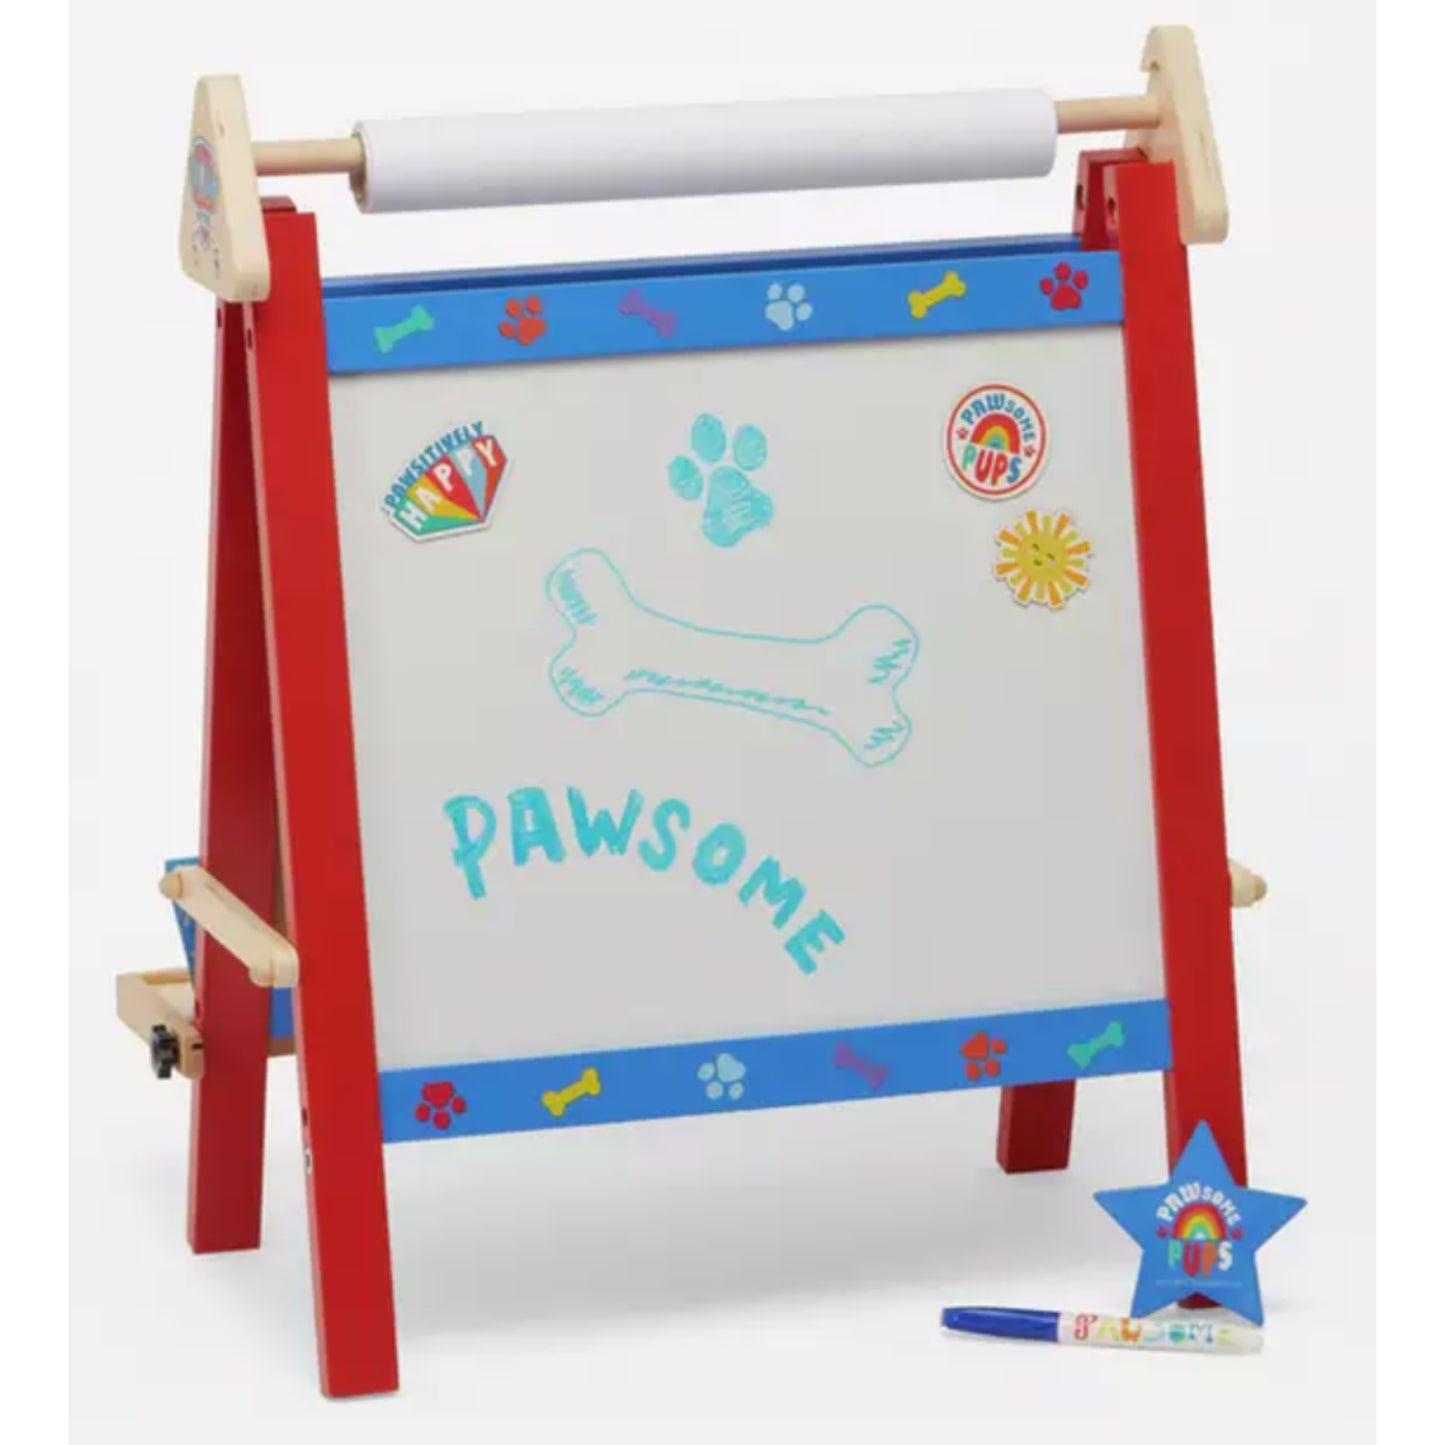 Paw Patrol Wooden Easel